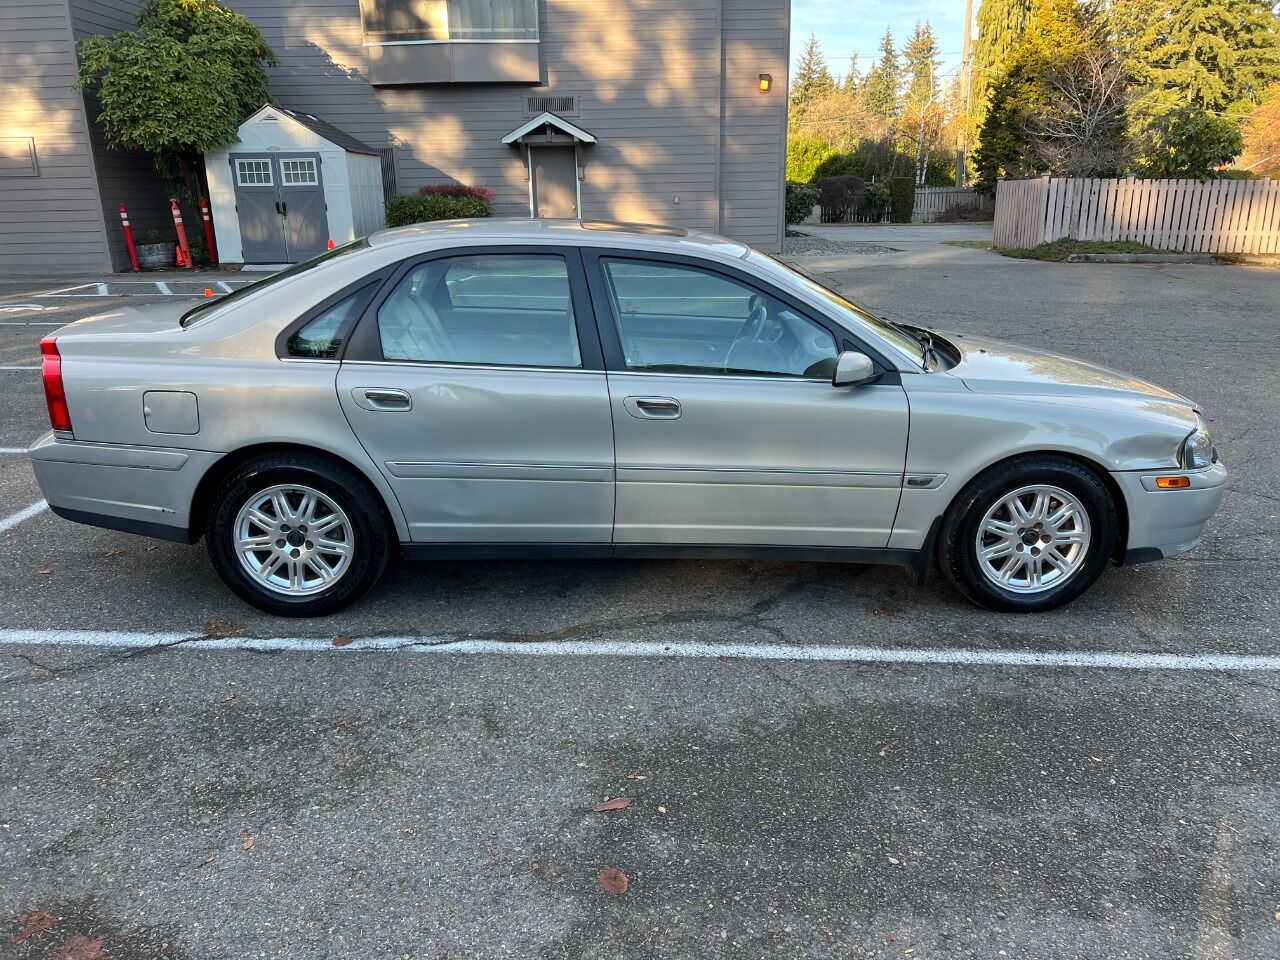 2004 Volvo S80 For Sale - Carsforsale.com®